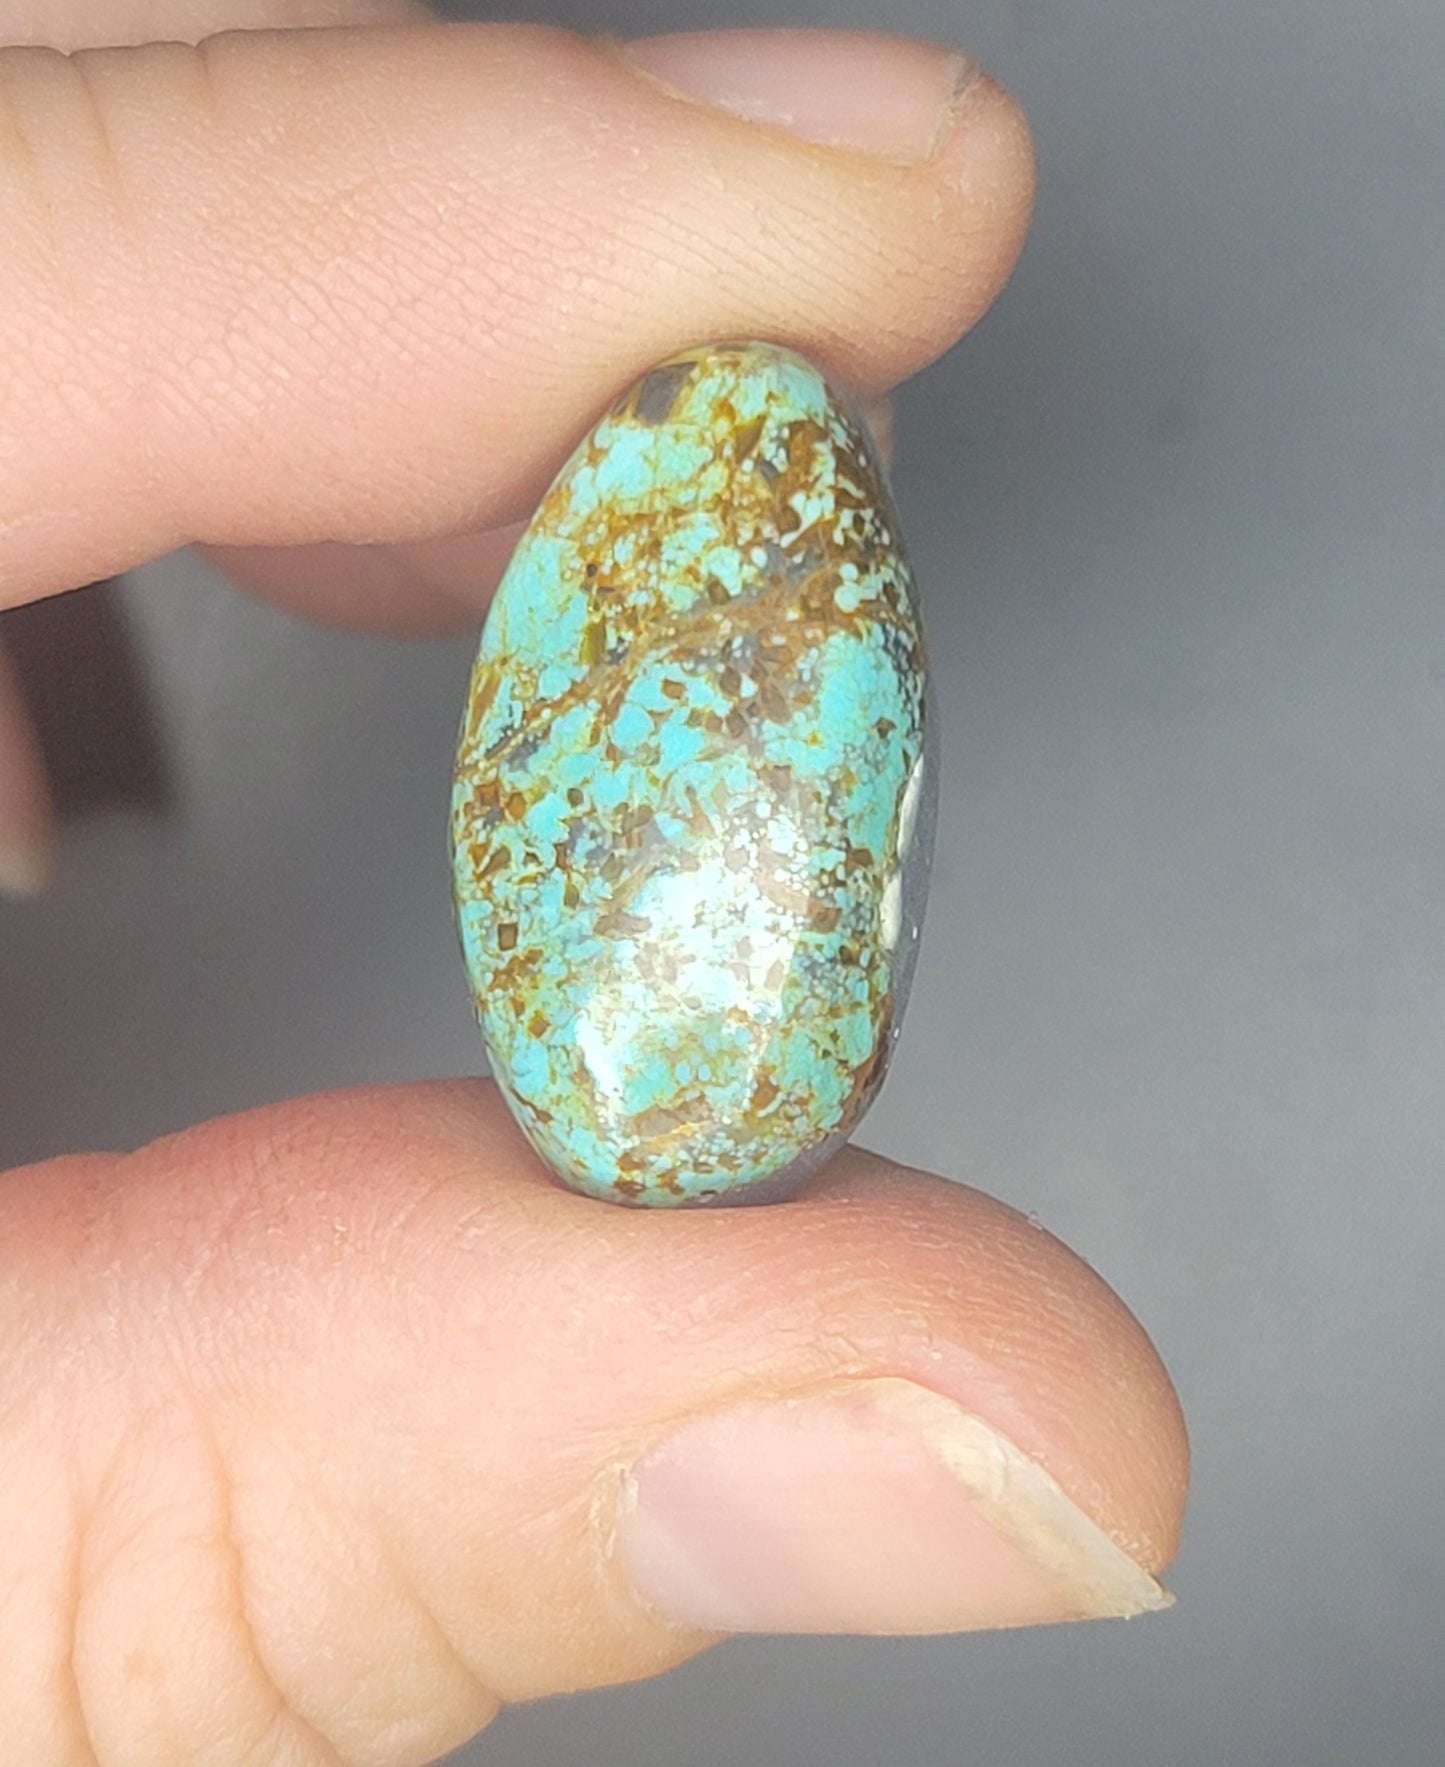 Number 8 Mine Turquoise Cabochon